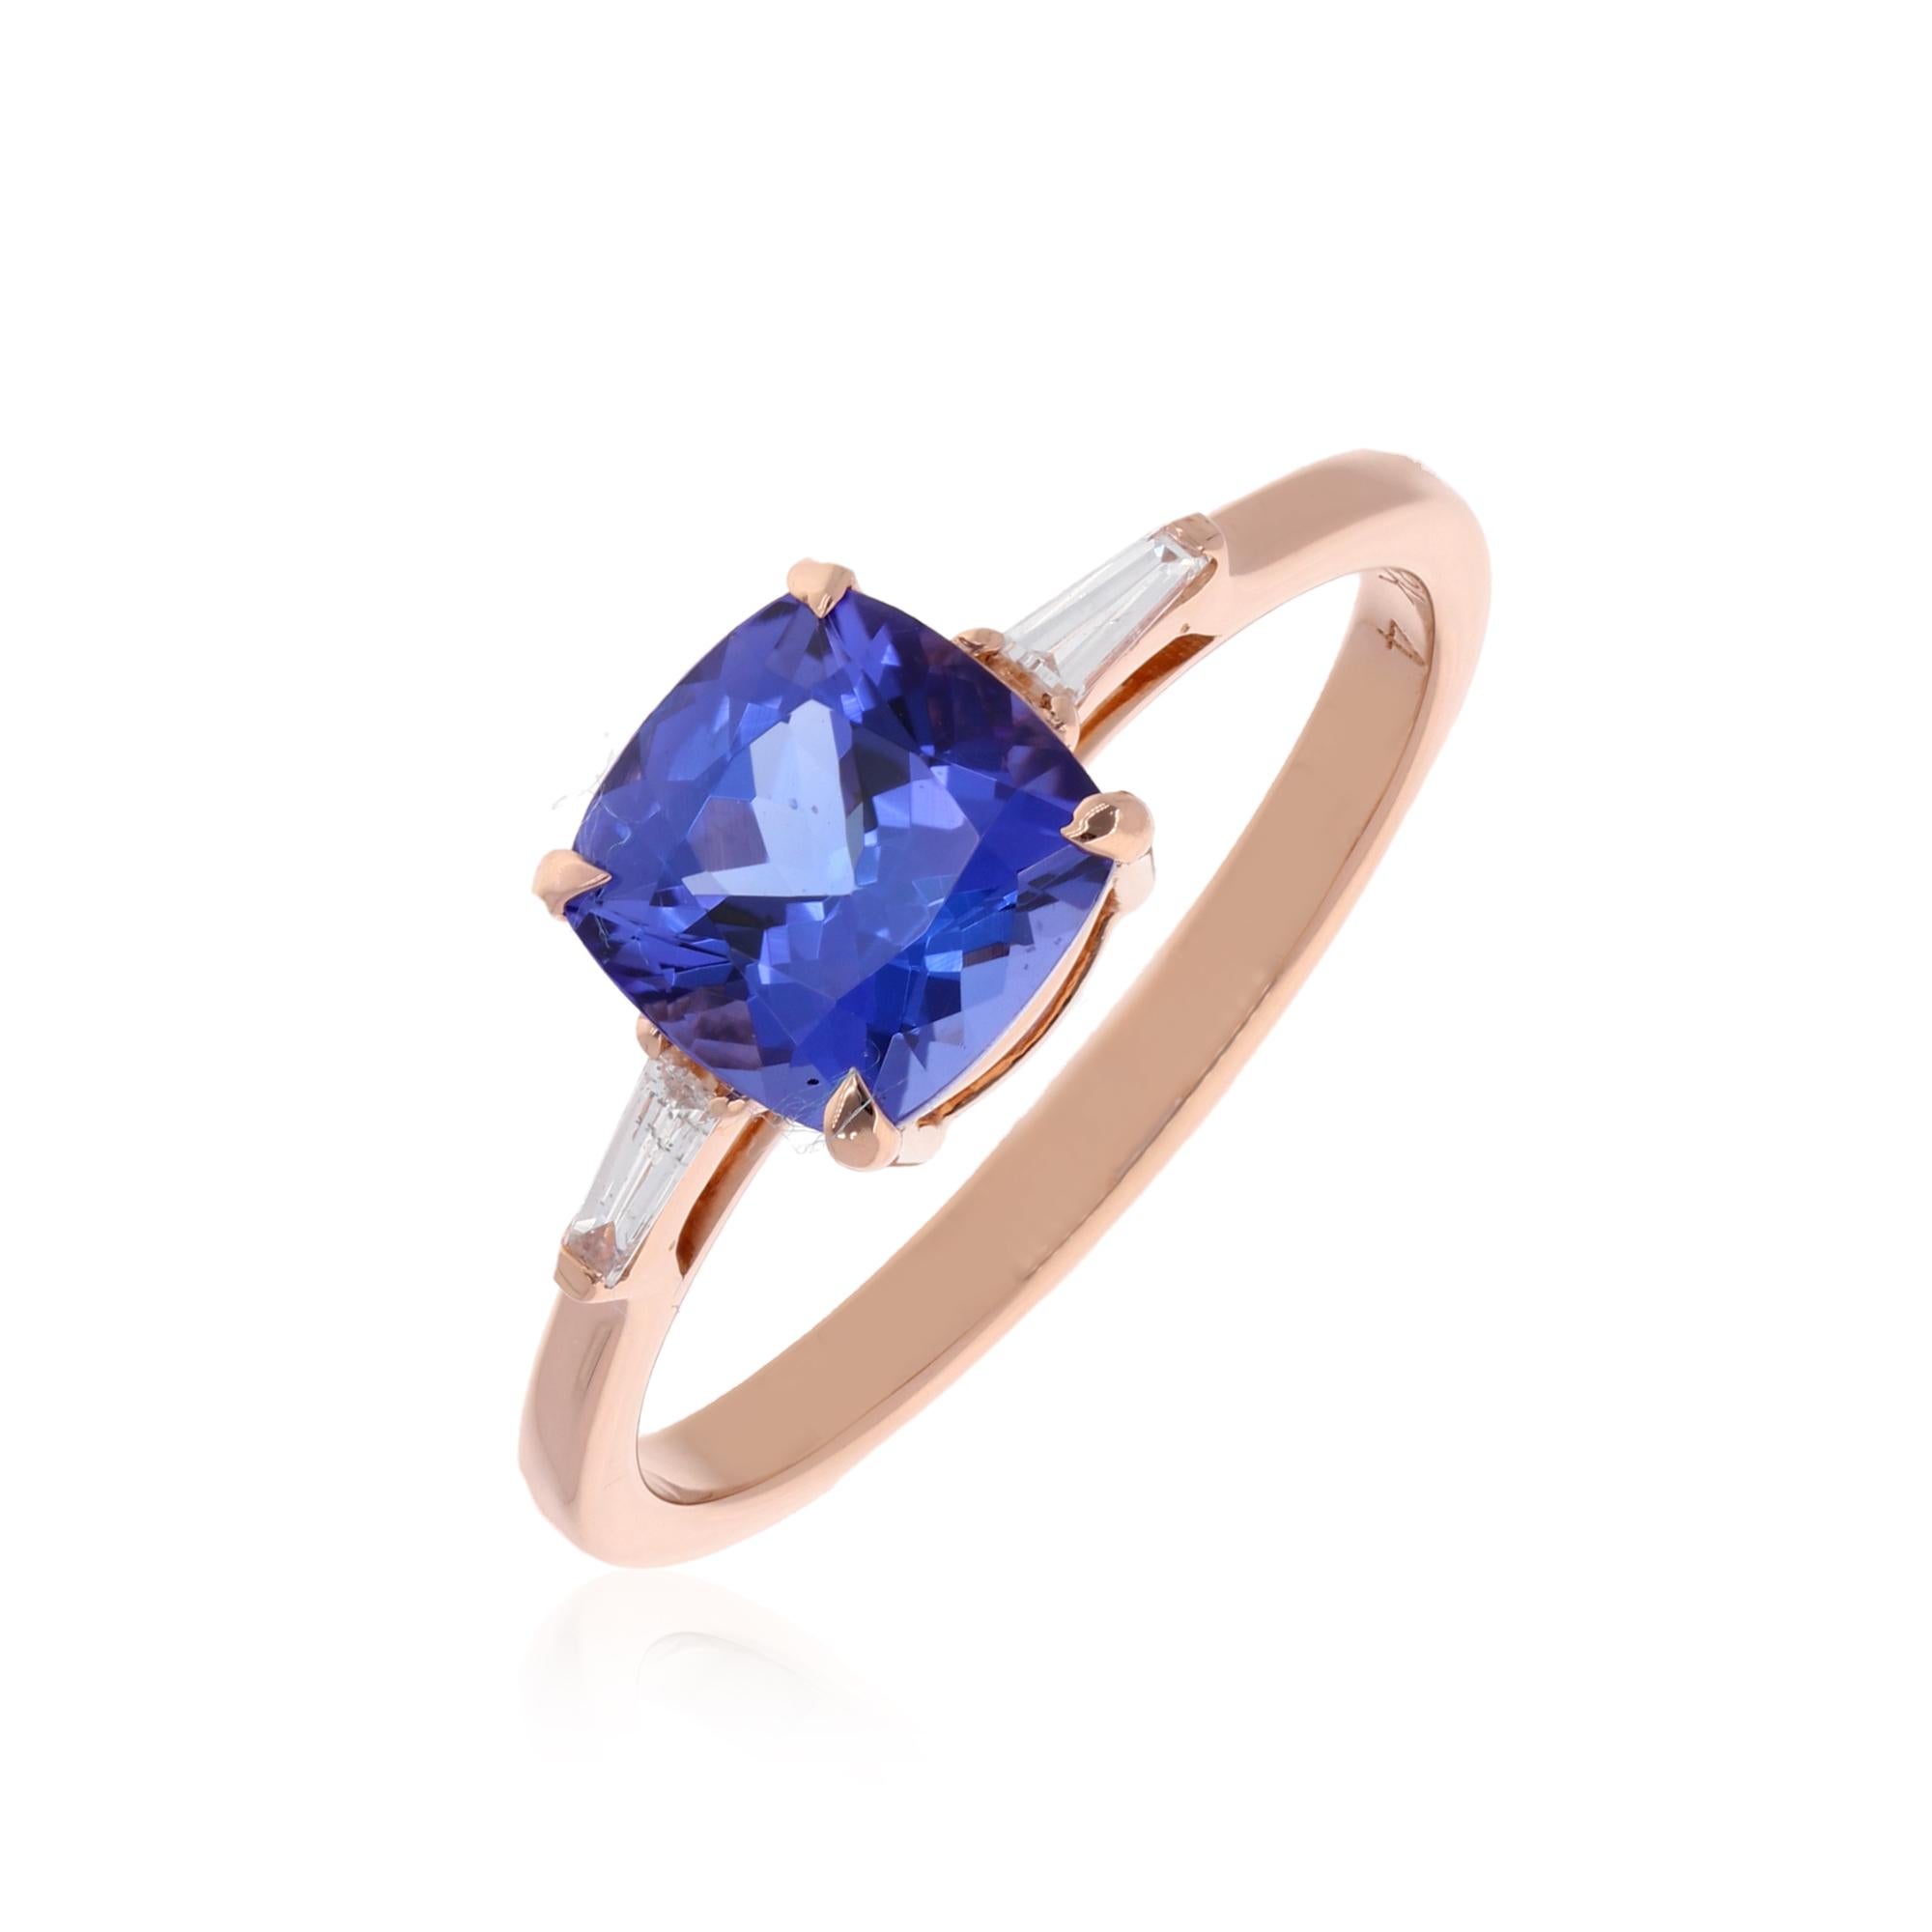 Code :- SER-22344
Gross Wt. :- 2.93 gm
18k Rose Gold Wt. :- 2.58 gm
Natural Diamond Wt. :- 0.09 Ct. ( AVERAGE DIAMOND CLARITY SI1-SI2 & COLOR H-I )
Tanzanite Wt. :- 1.65 Ct
Ring Size :- 7 US & All size available

✦ Sizing
.....................
We